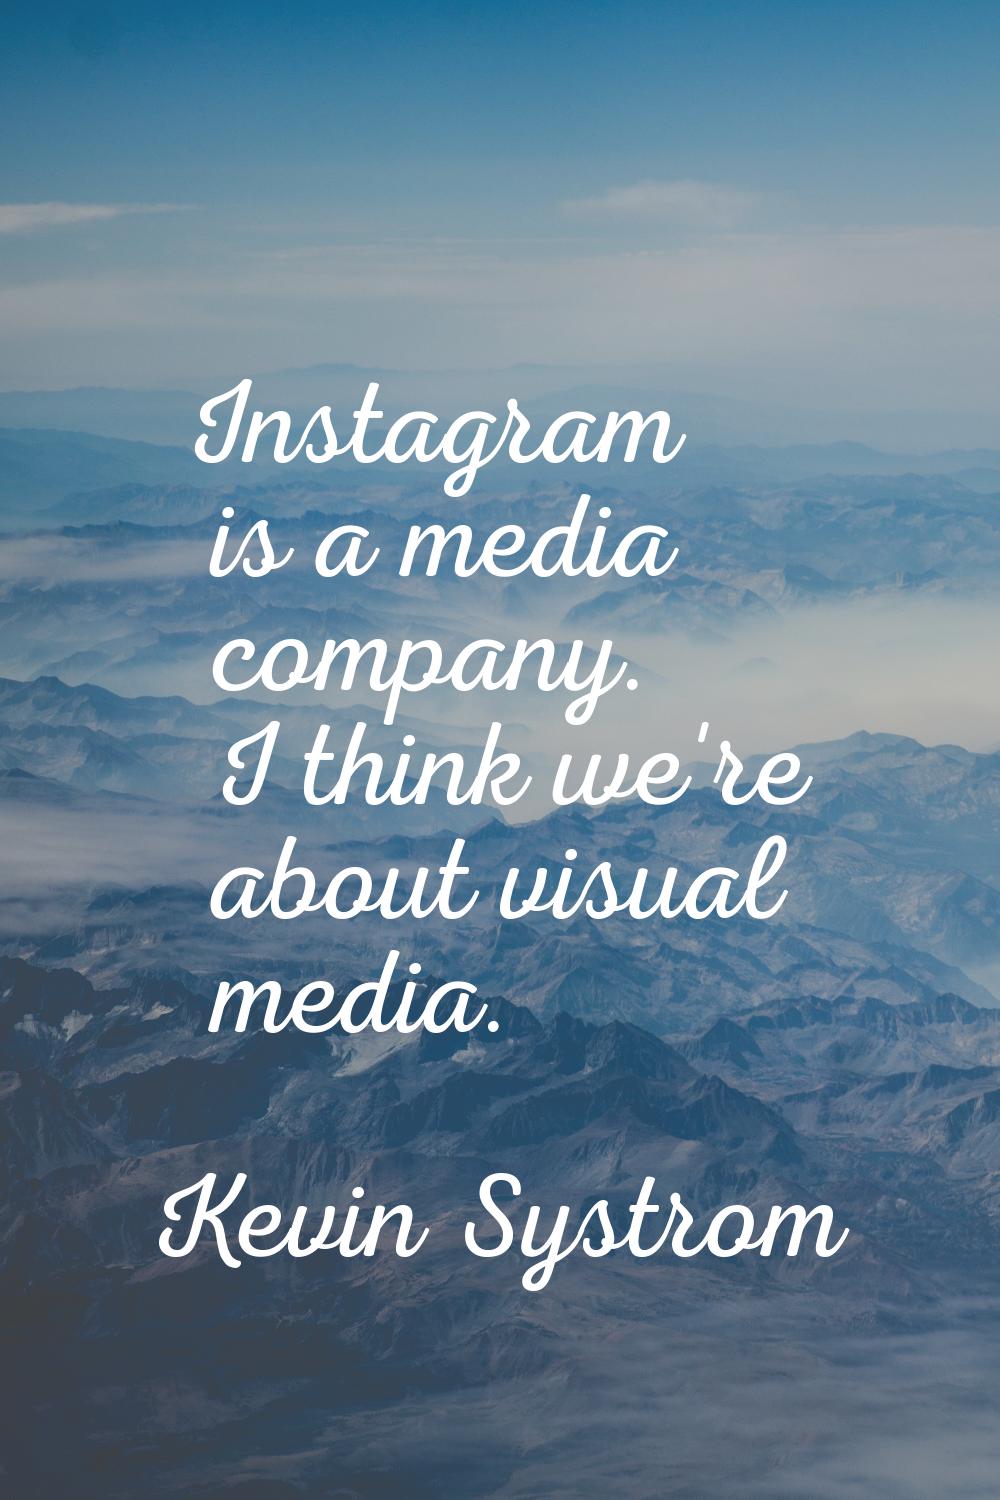 Instagram is a media company. I think we're about visual media.